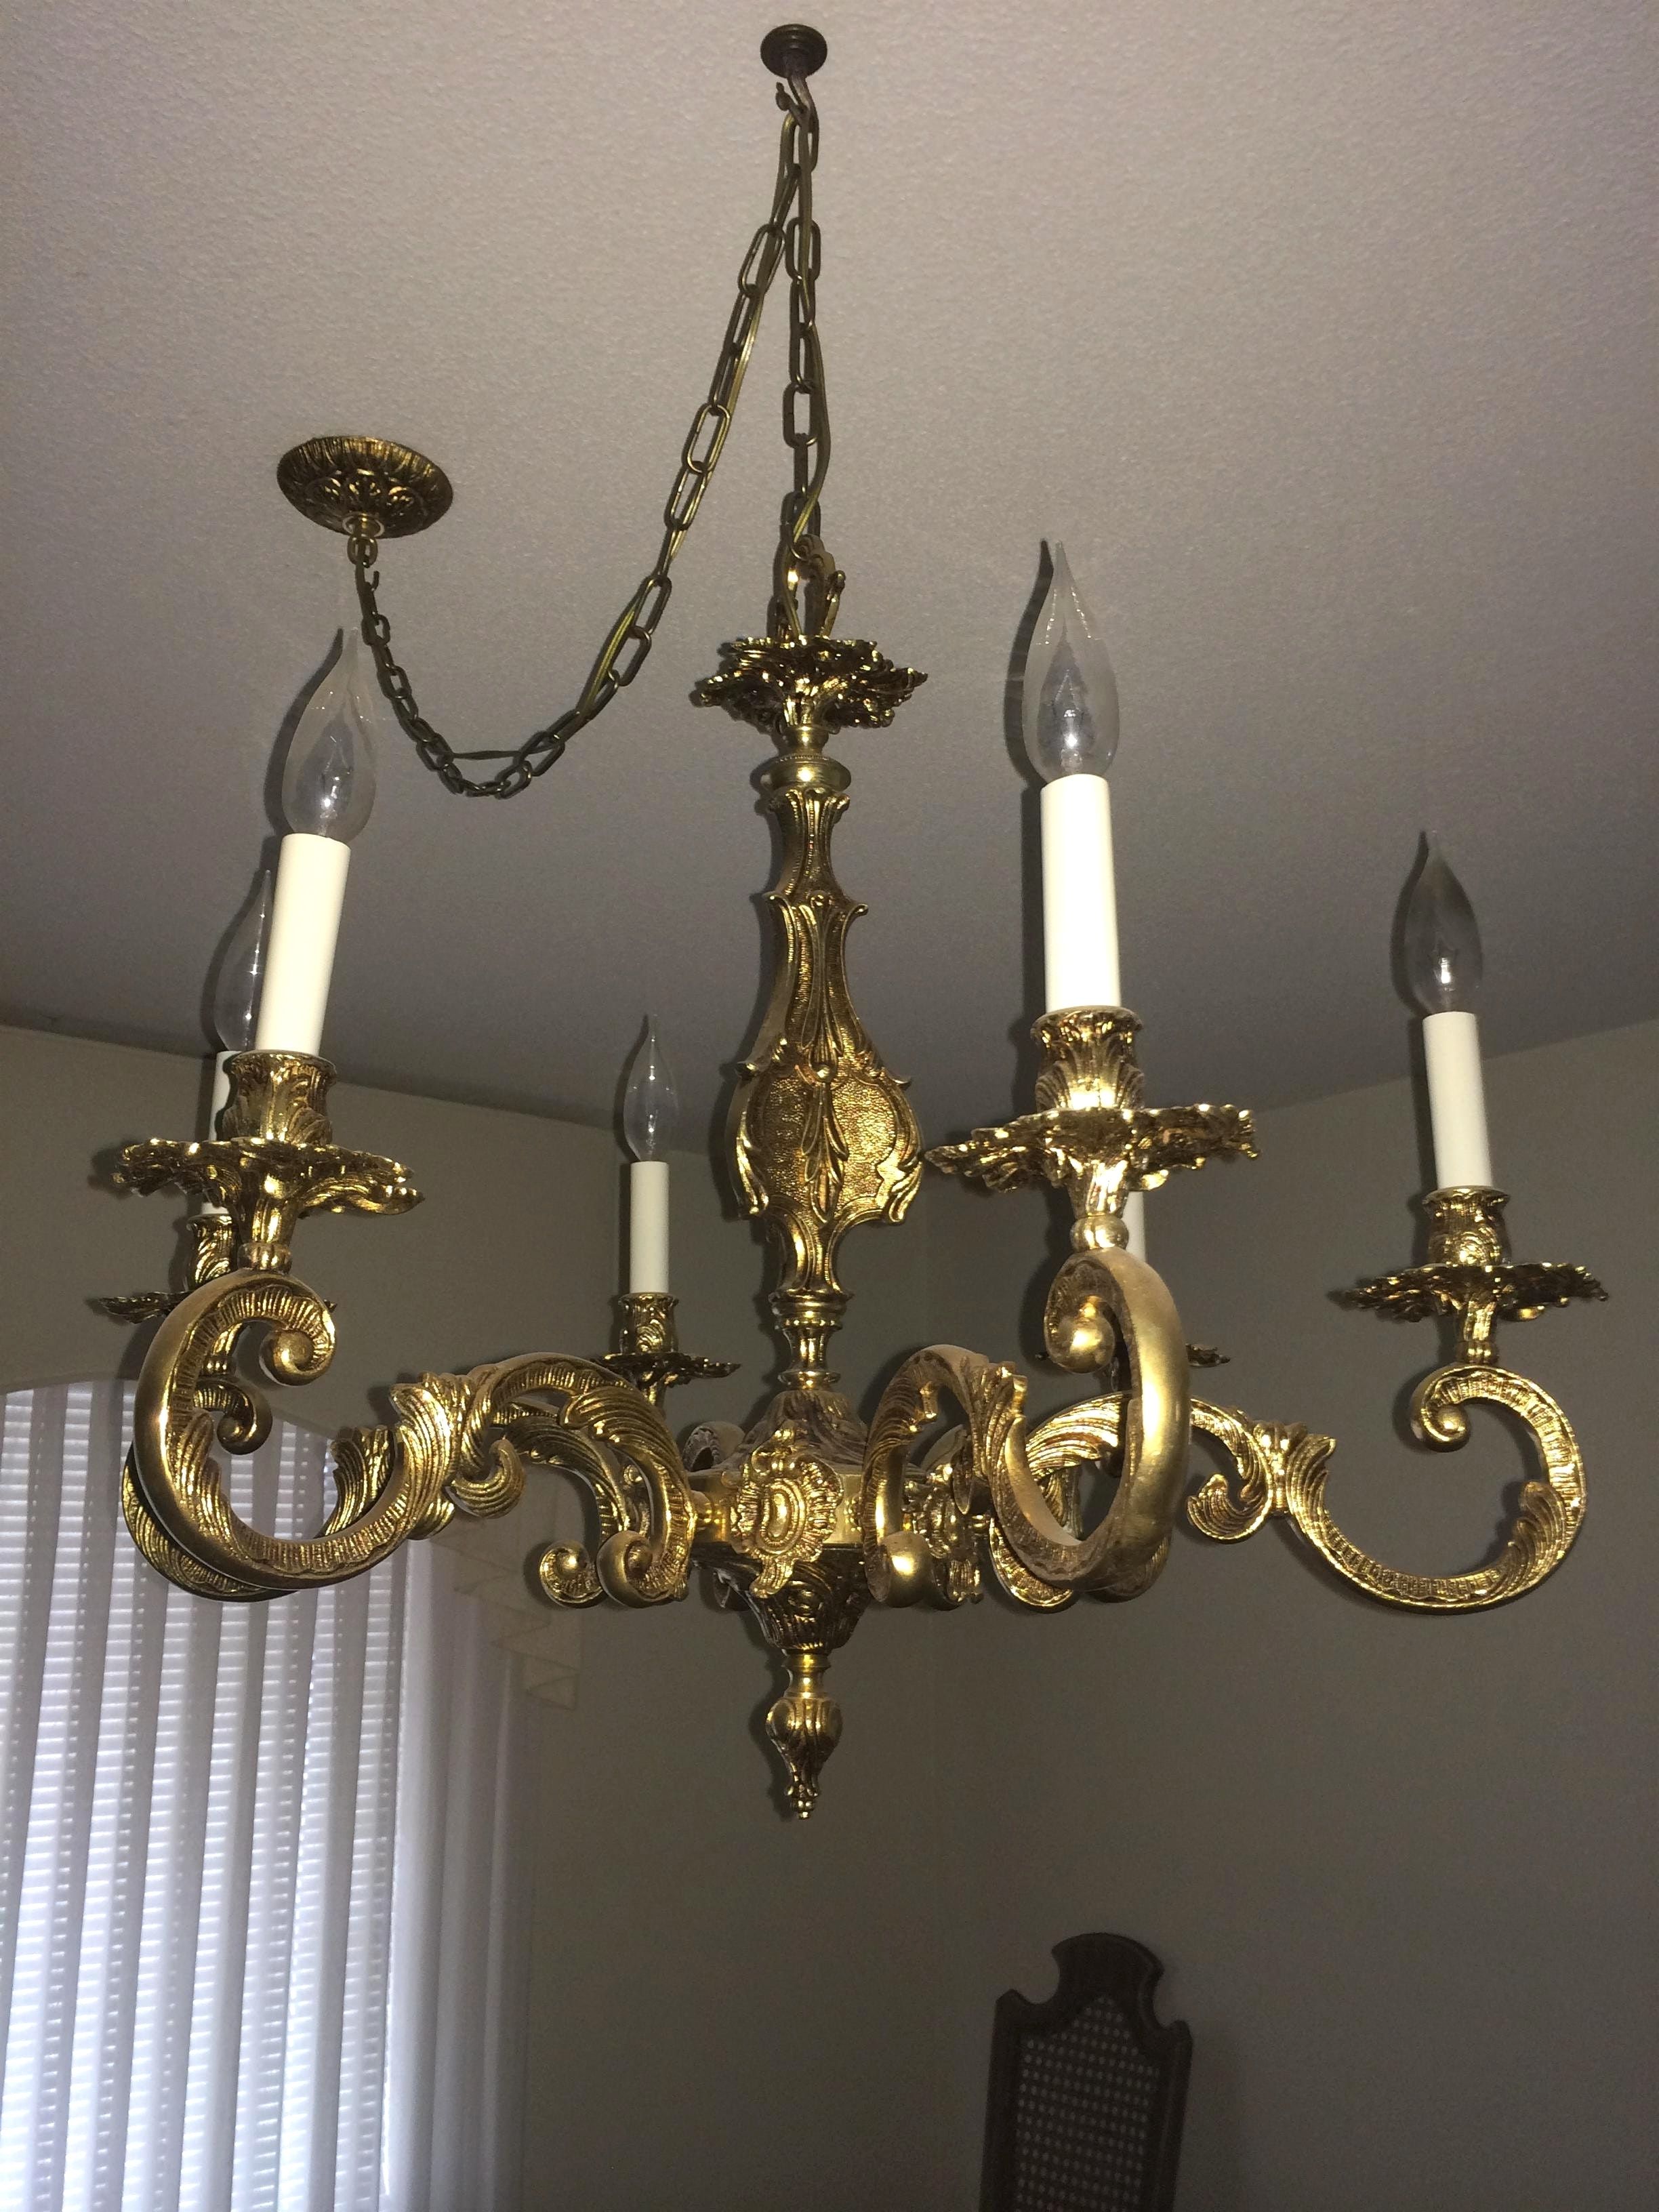 Well Known Brass Chandeliers For Light : Antique Brass Chandelier Value With Appraisal Instappraisal (View 16 of 20)